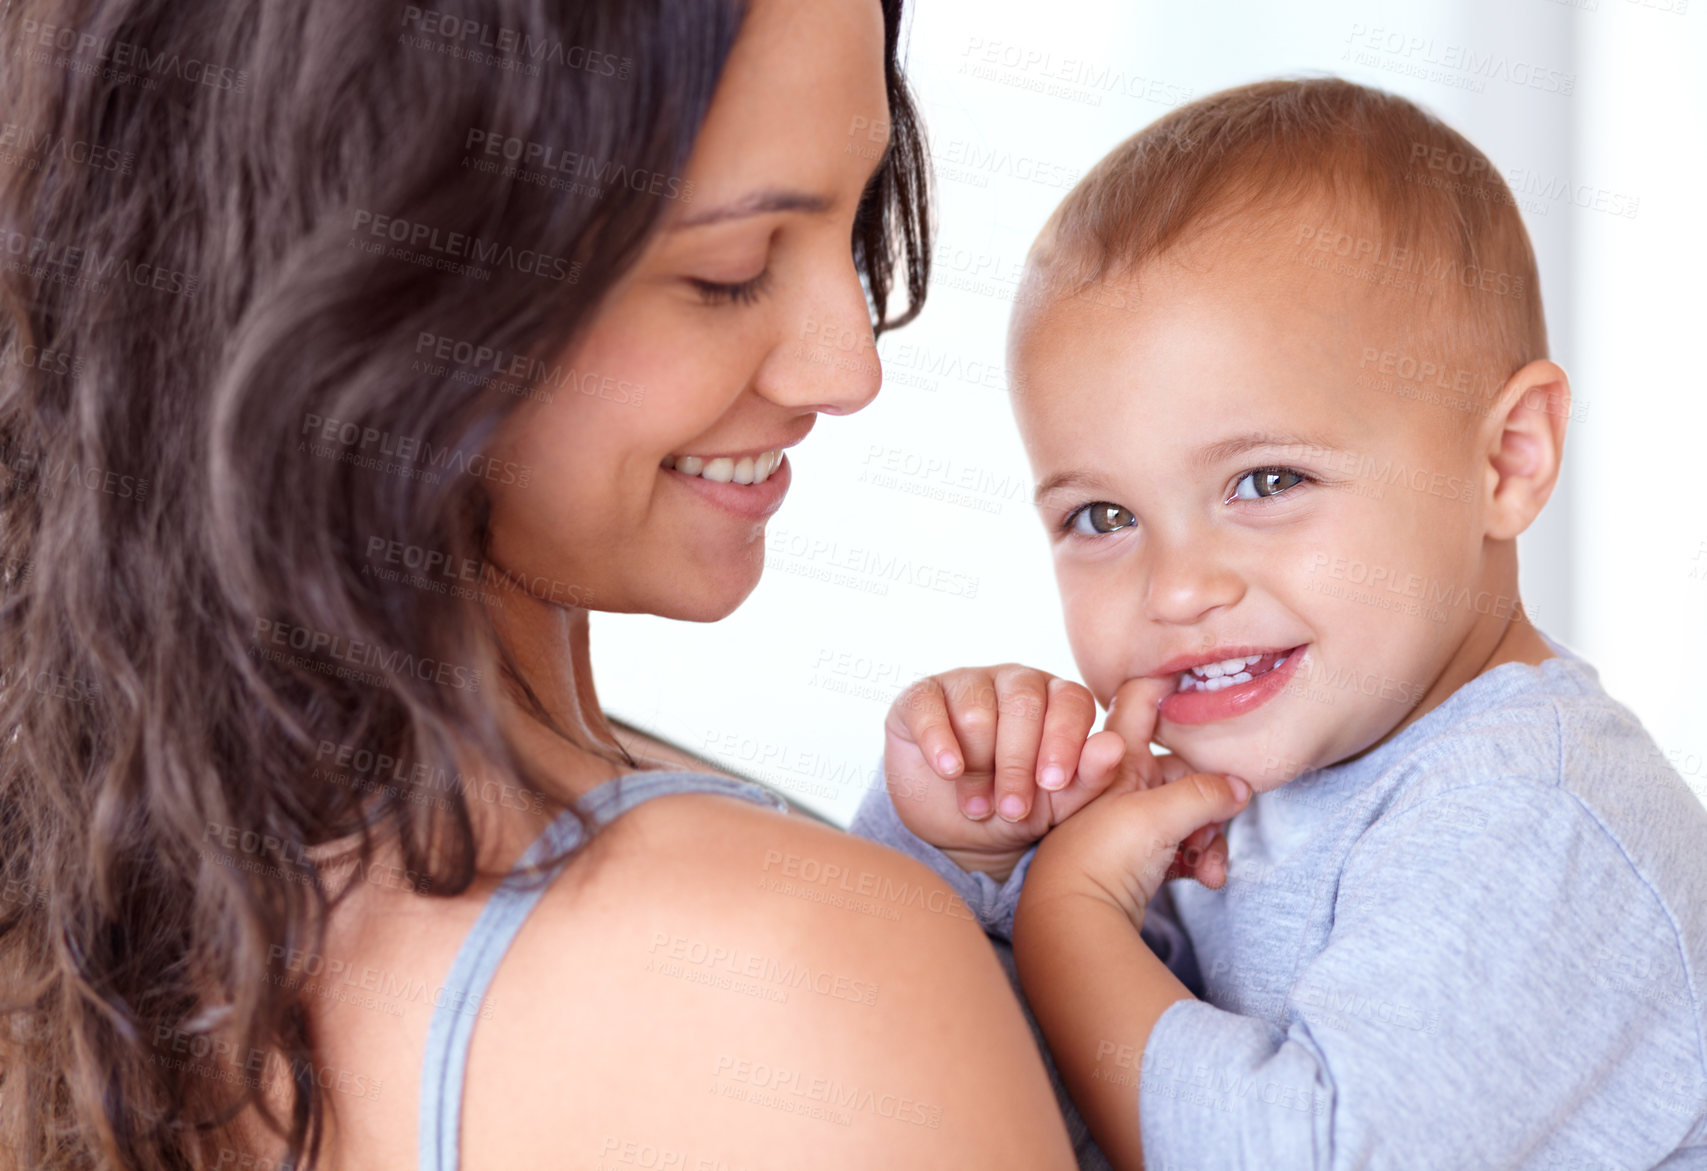 Buy stock photo Cropped image of a mother holding her little boy